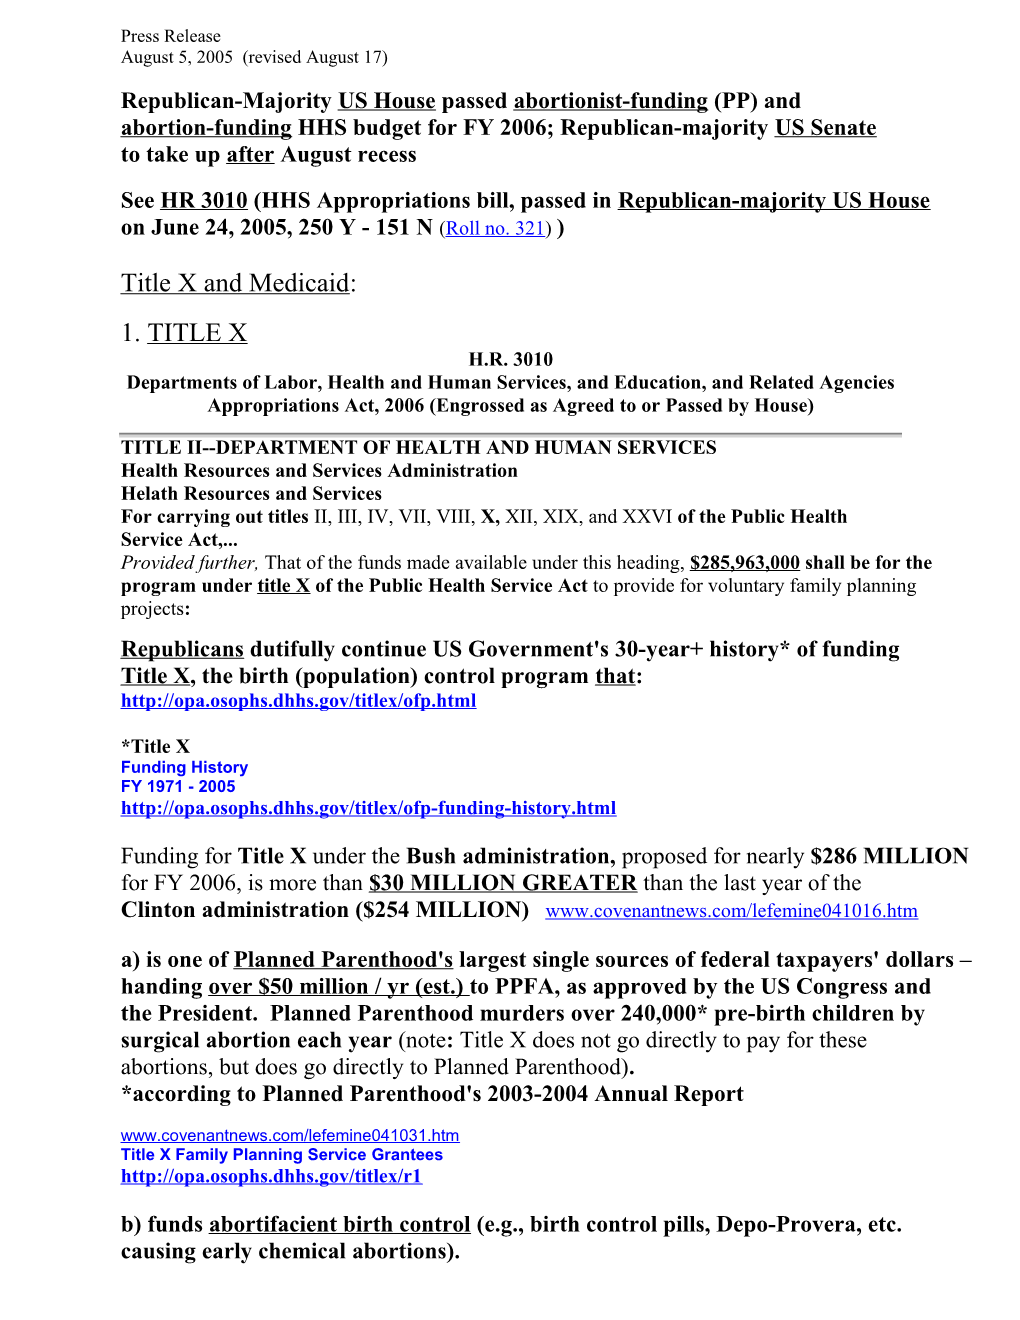 Abortion-Funding HHS Budget for FY 2006; Republican-Majority US Senate